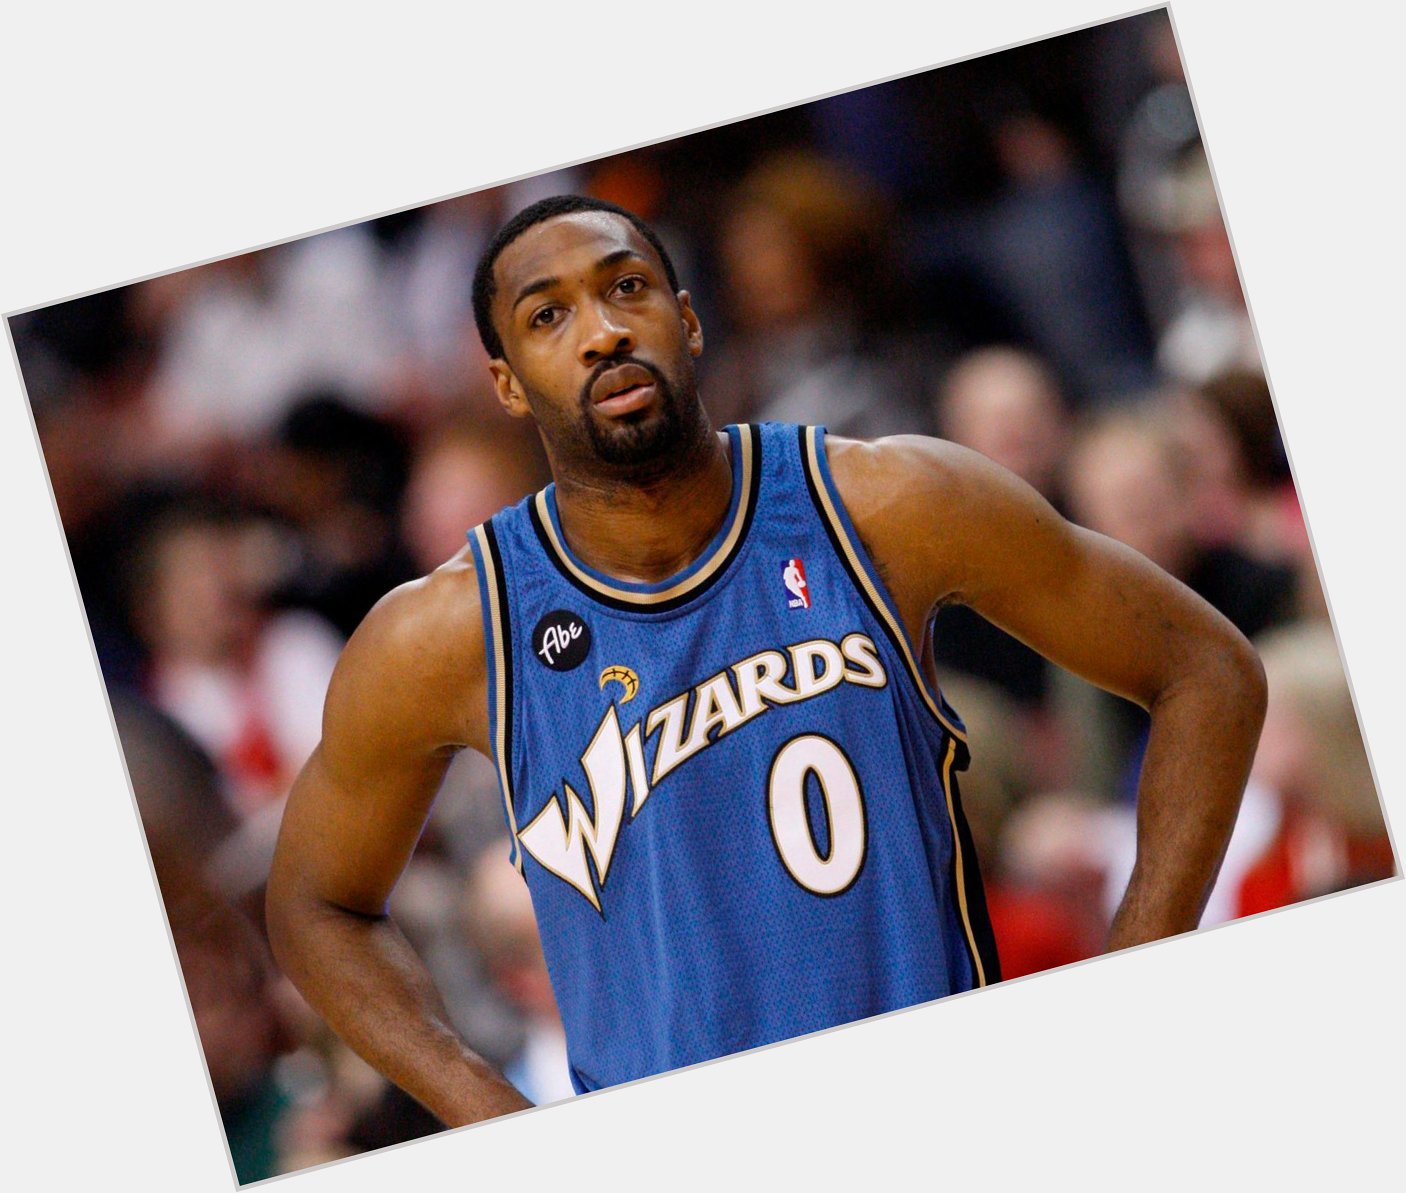 Happy Birthday to Gilbert Arenas, who turns 33 today! 